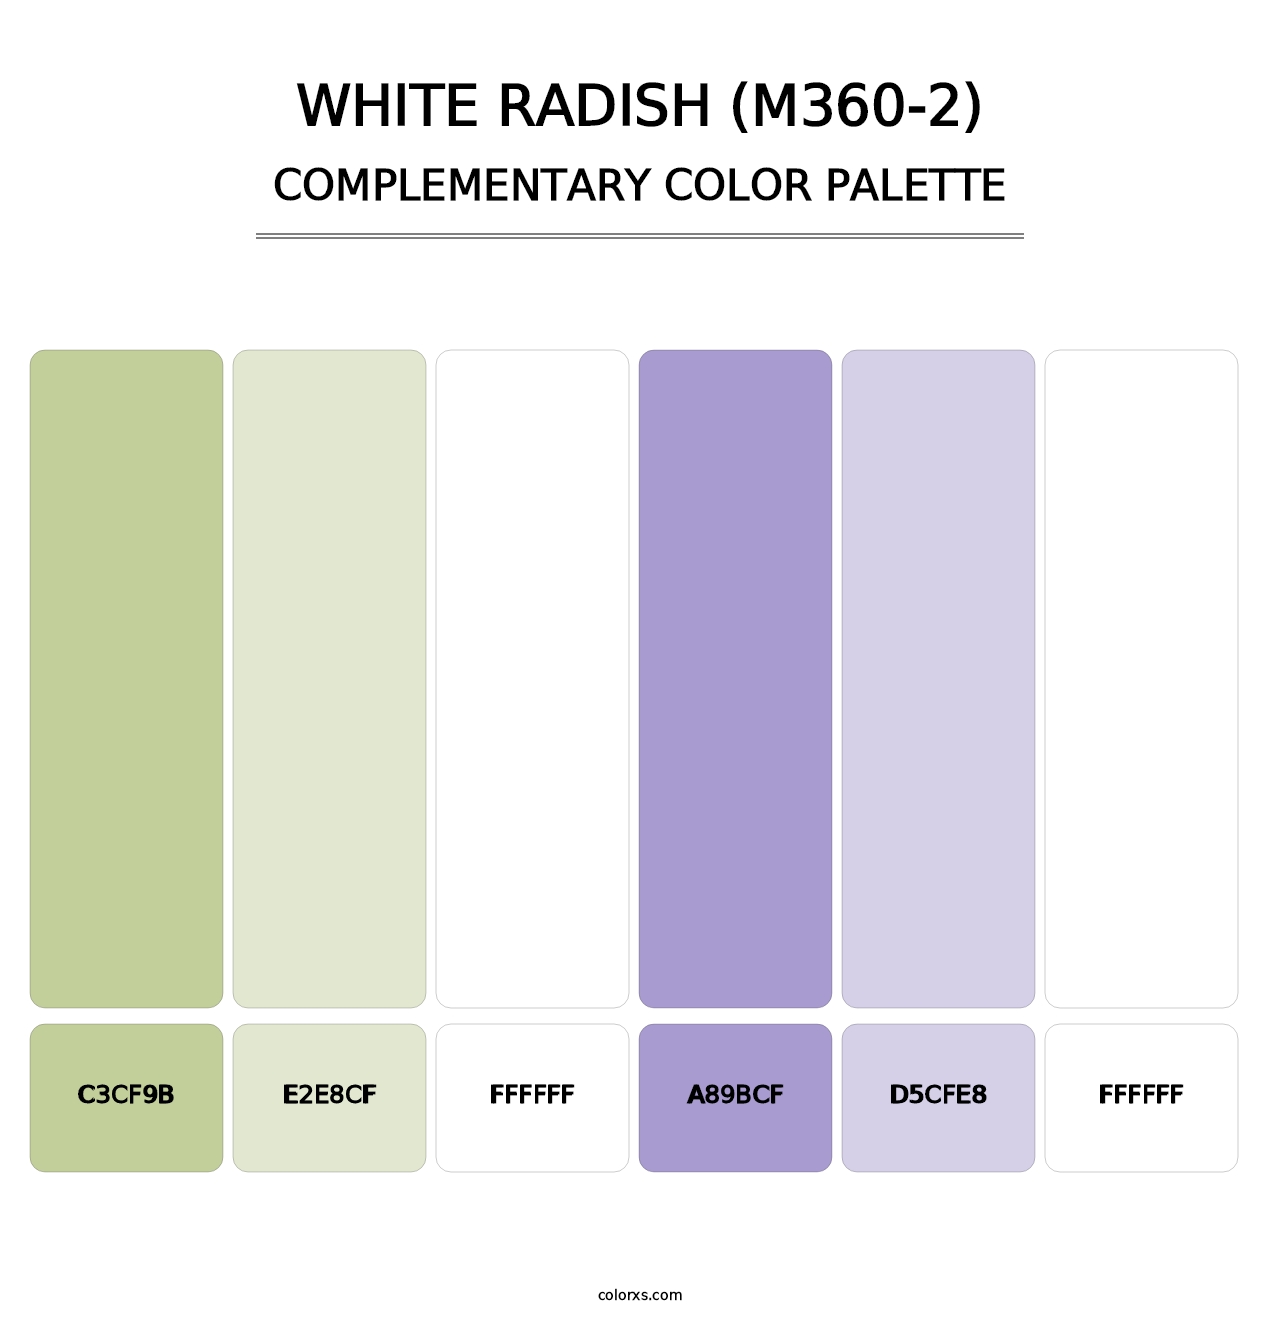 White Radish (M360-2) - Complementary Color Palette